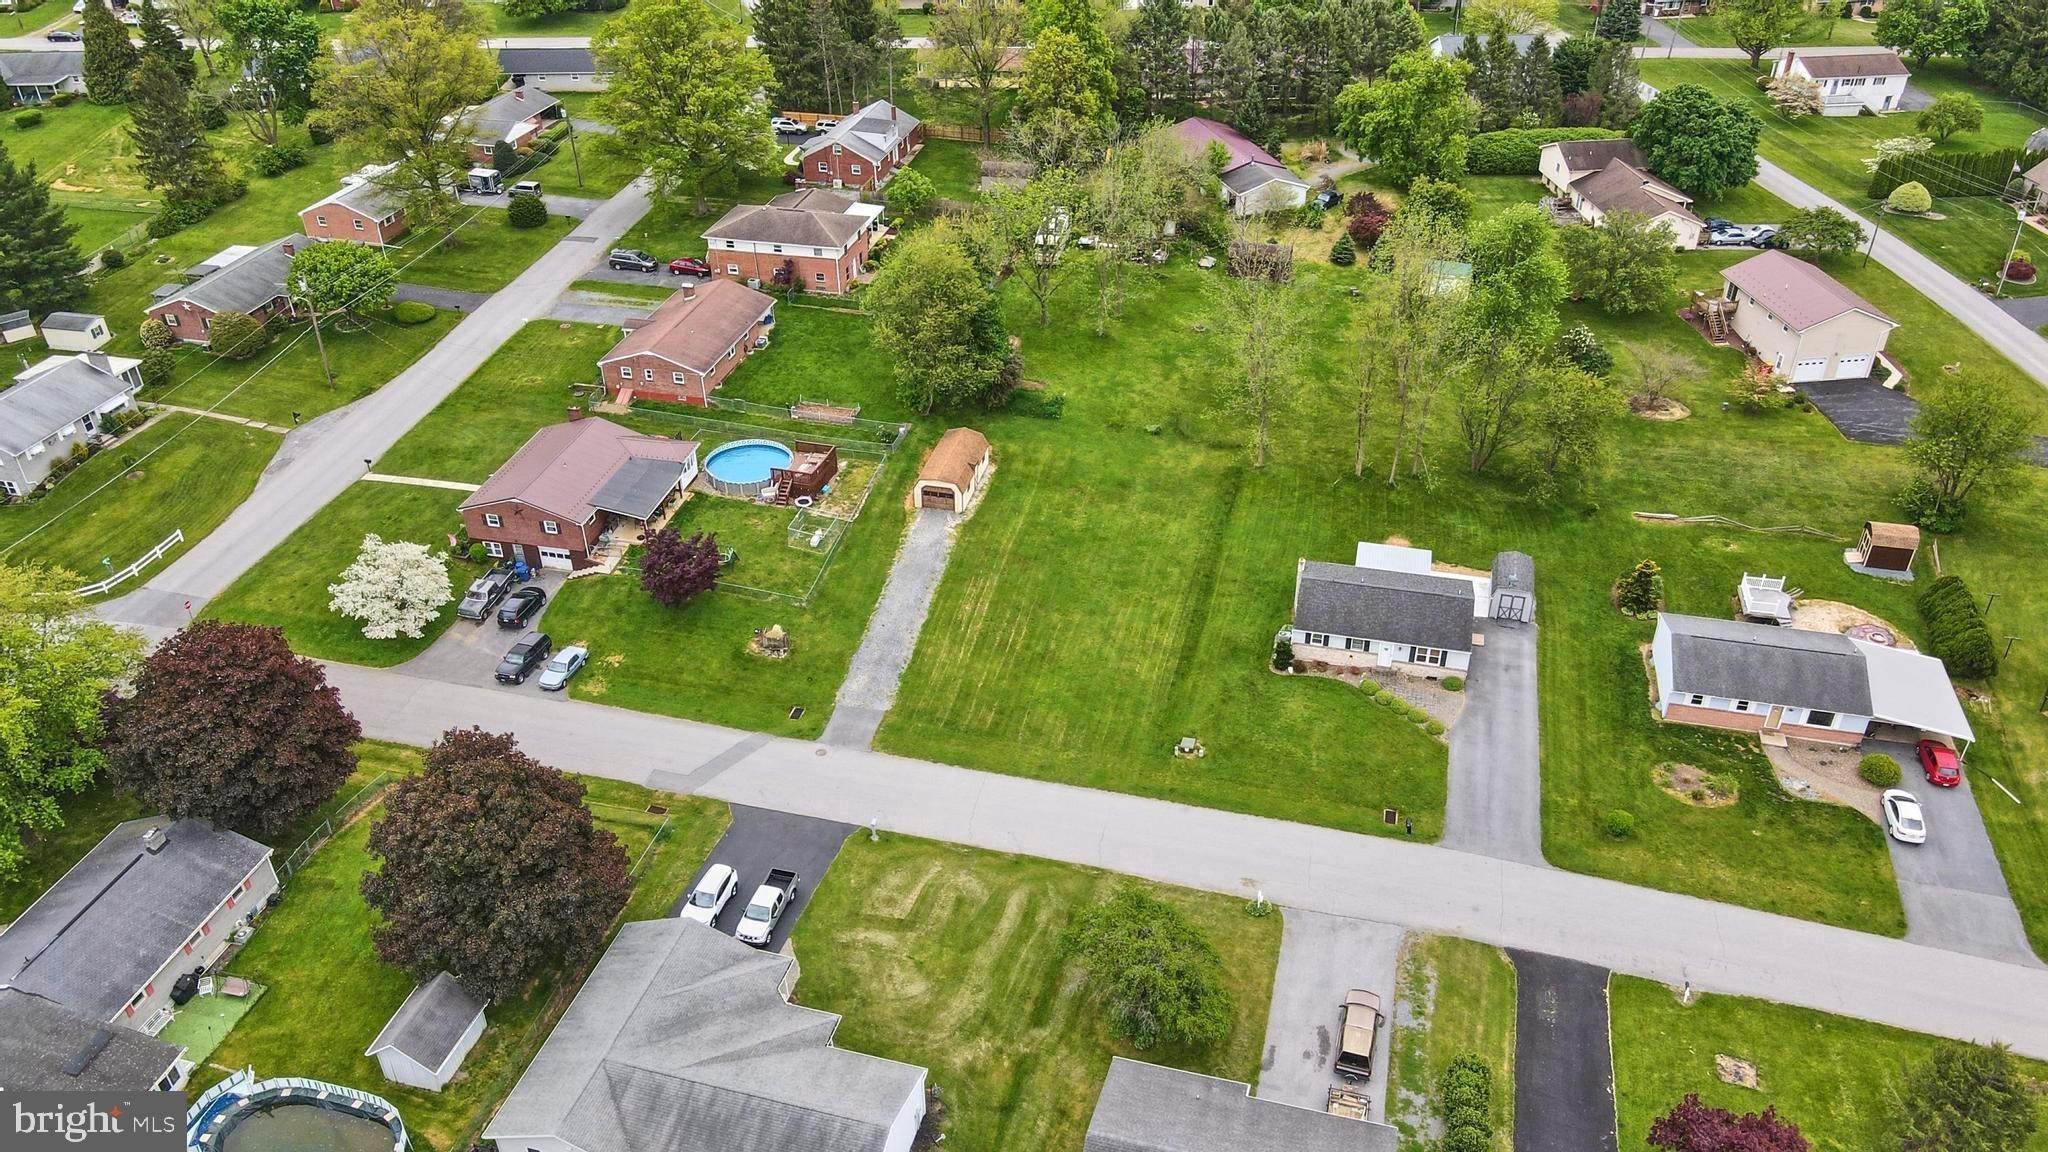 6. Land for Sale at Fayetteville, PA 17222